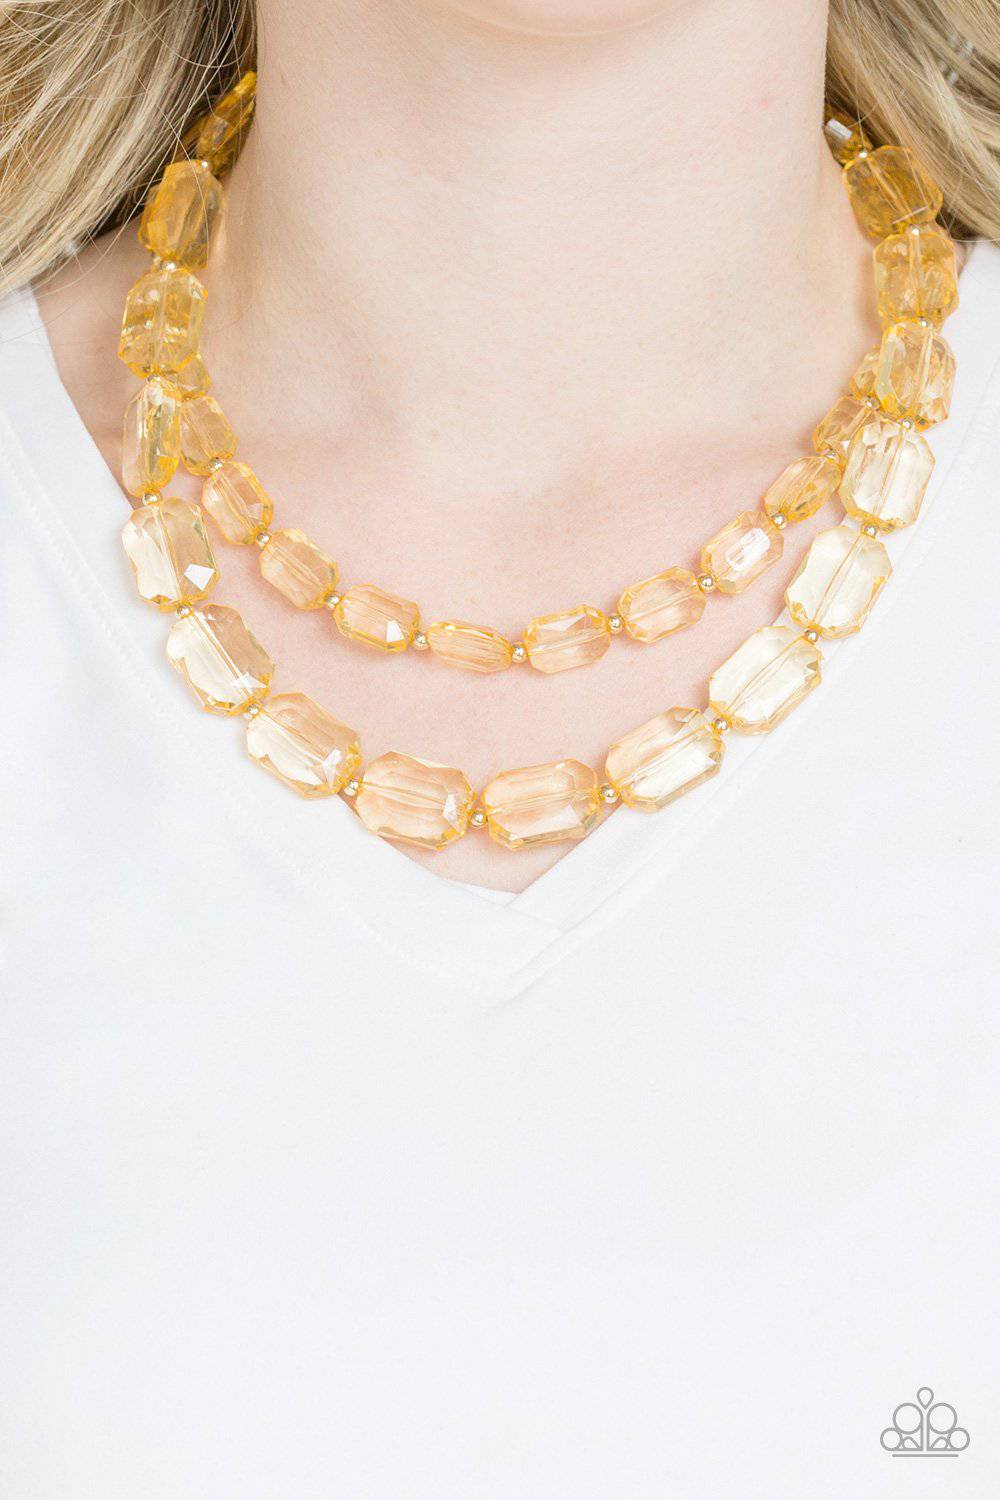 Ice Bank - Gold Acrylic Bead Necklace - Paparazzi Accessories - GlaMarous Titi Jewels